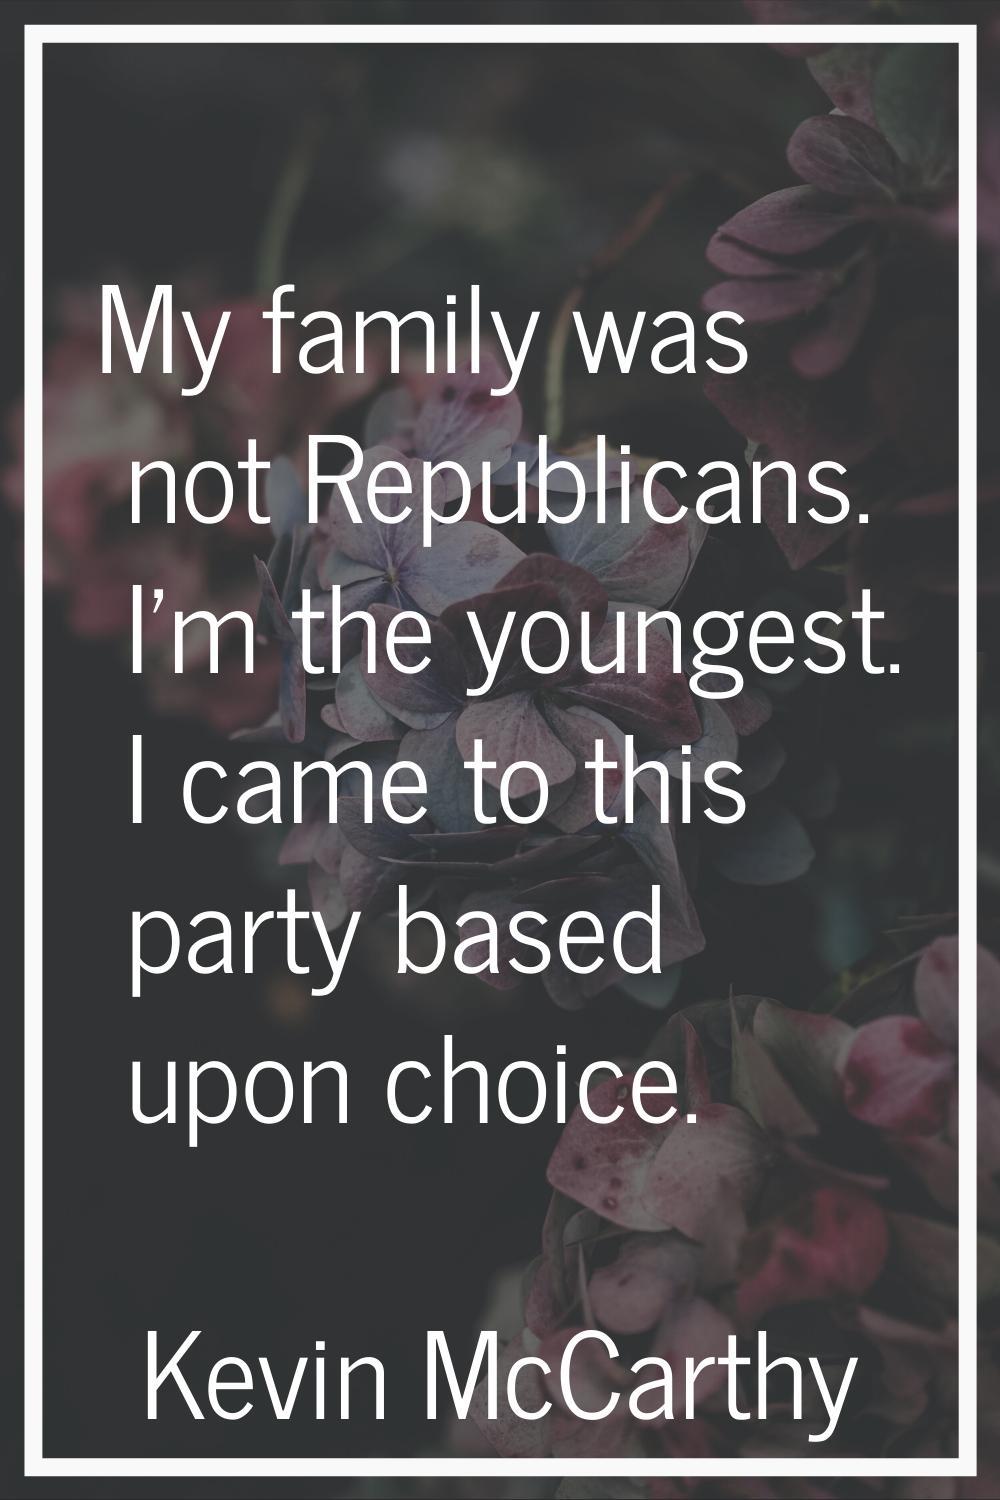 My family was not Republicans. I'm the youngest. I came to this party based upon choice.